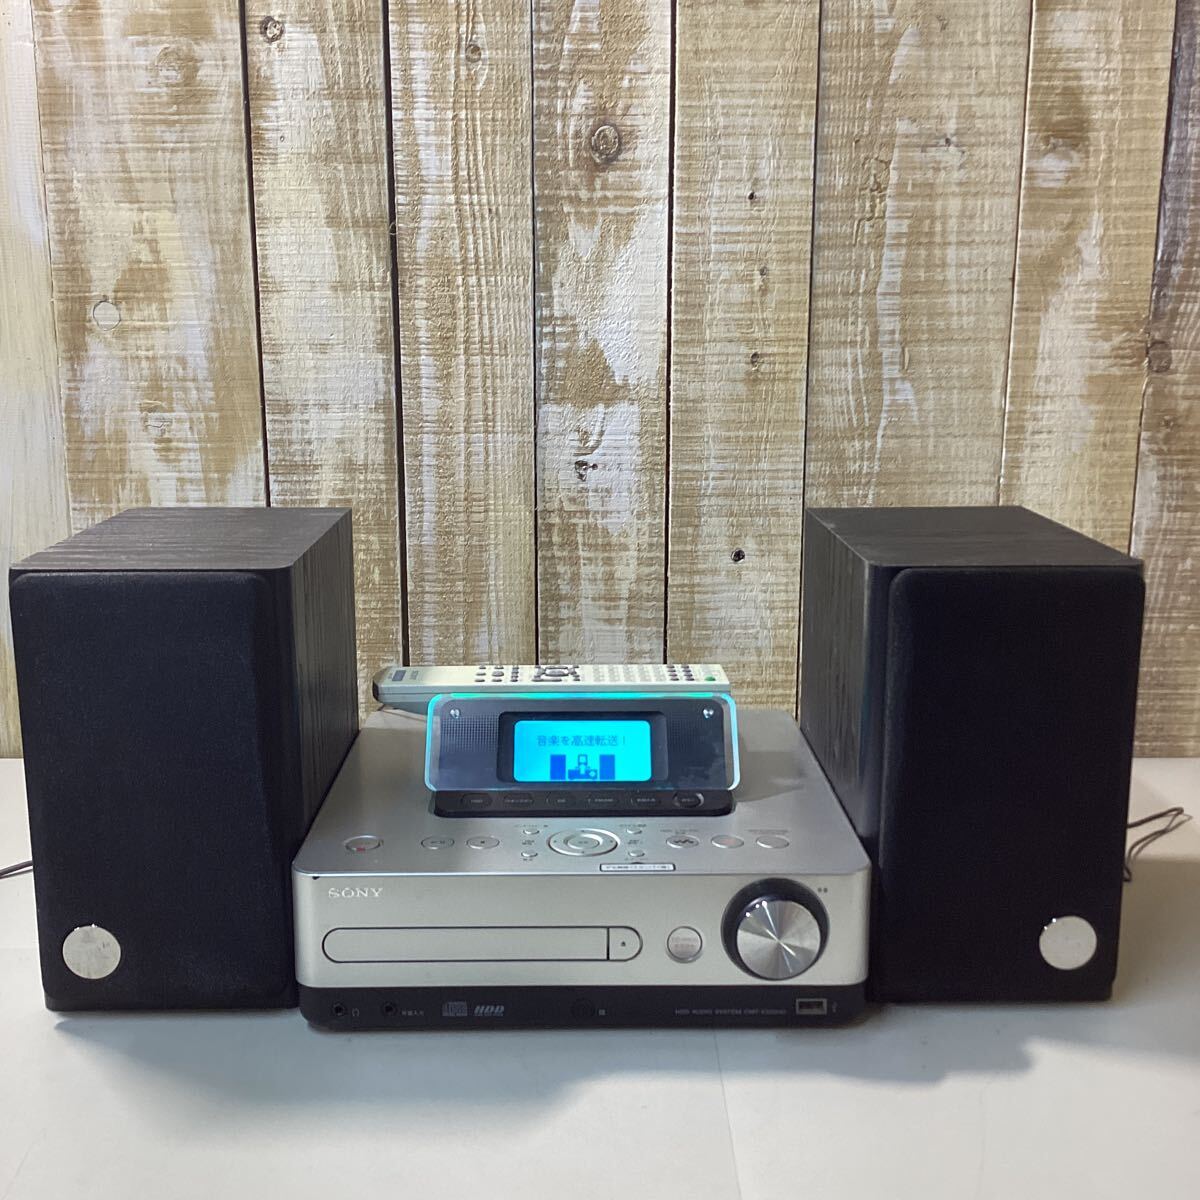 SONY Sony audio speaker CMT-E350HD SS-CE350HD sound equipment Walkman CD HDD recording audio equipment system player player 